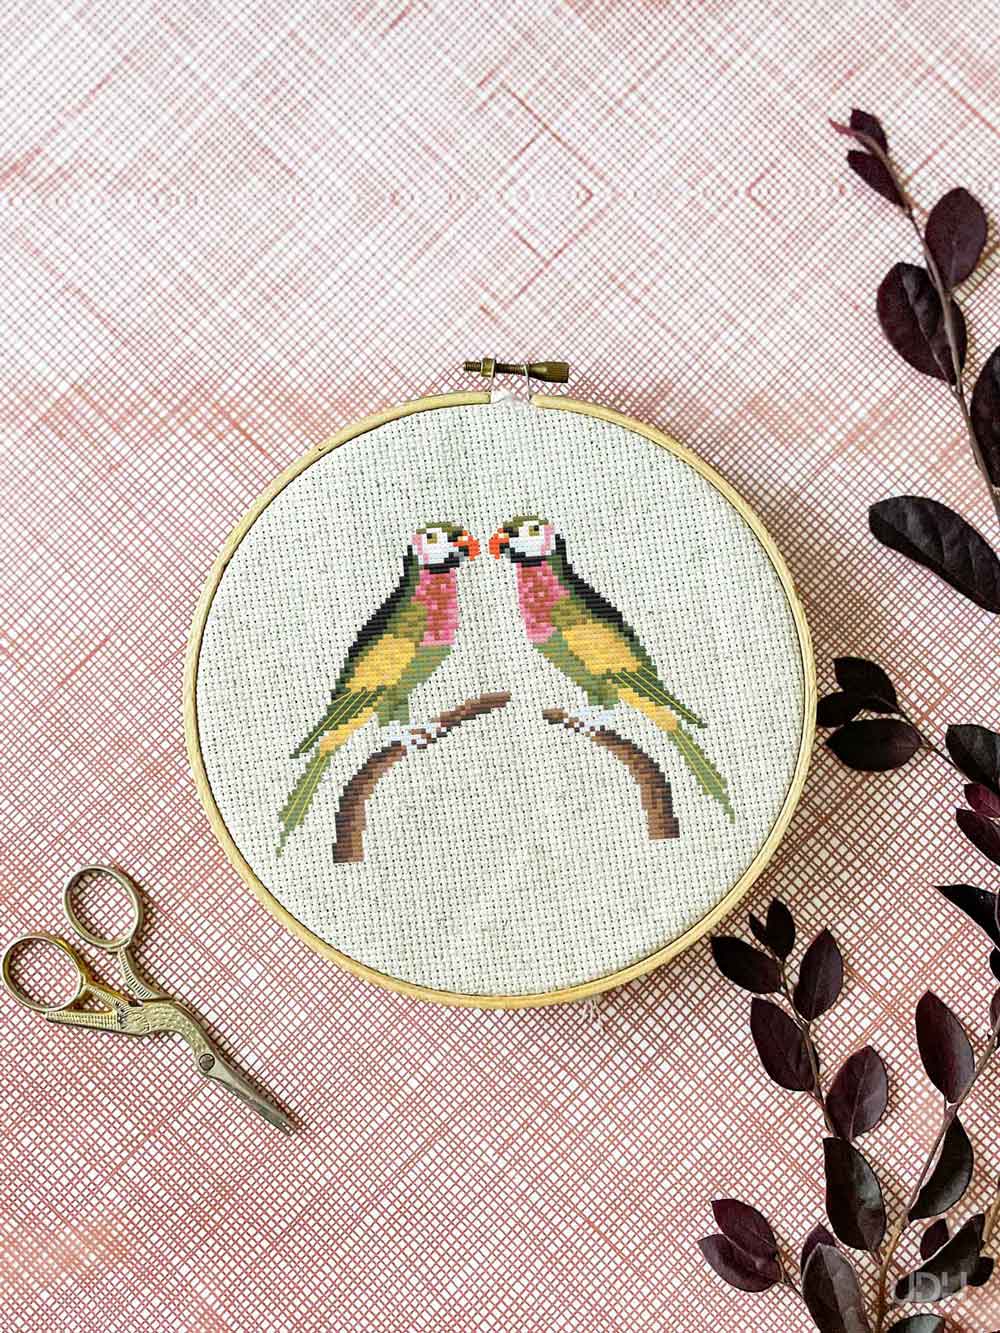 Let's Make An Easy Cross Stitch Pattern In Love Birds Theme